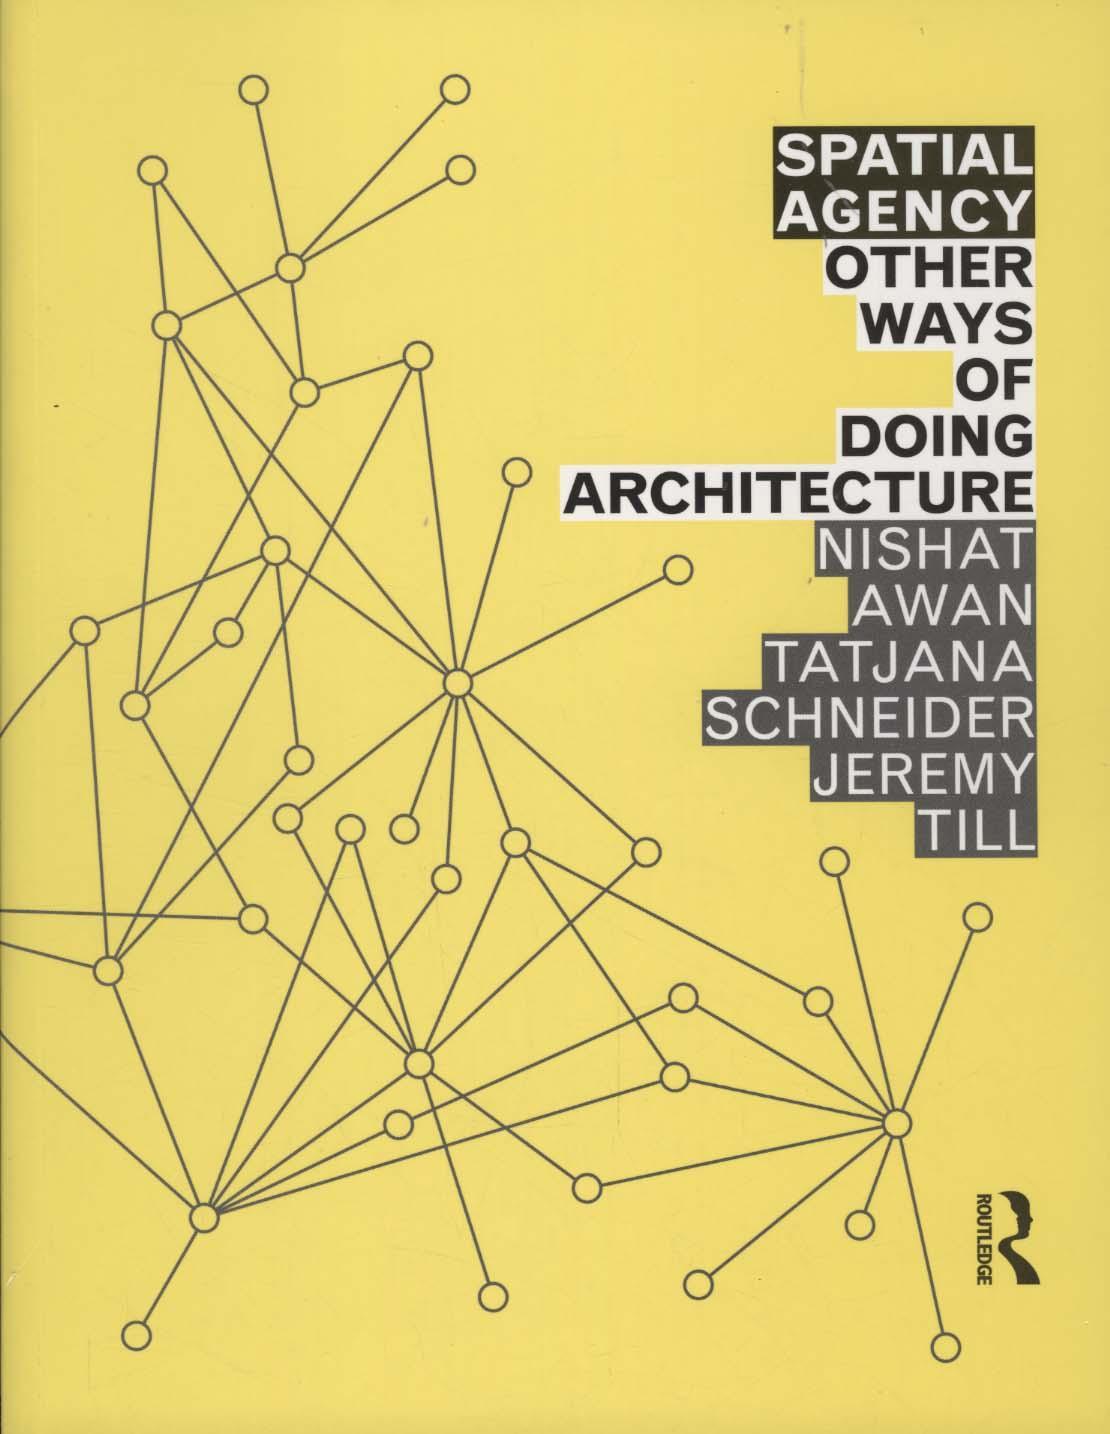 Spatial Agency: Other Ways of Doing Architecture - Nishat Awan